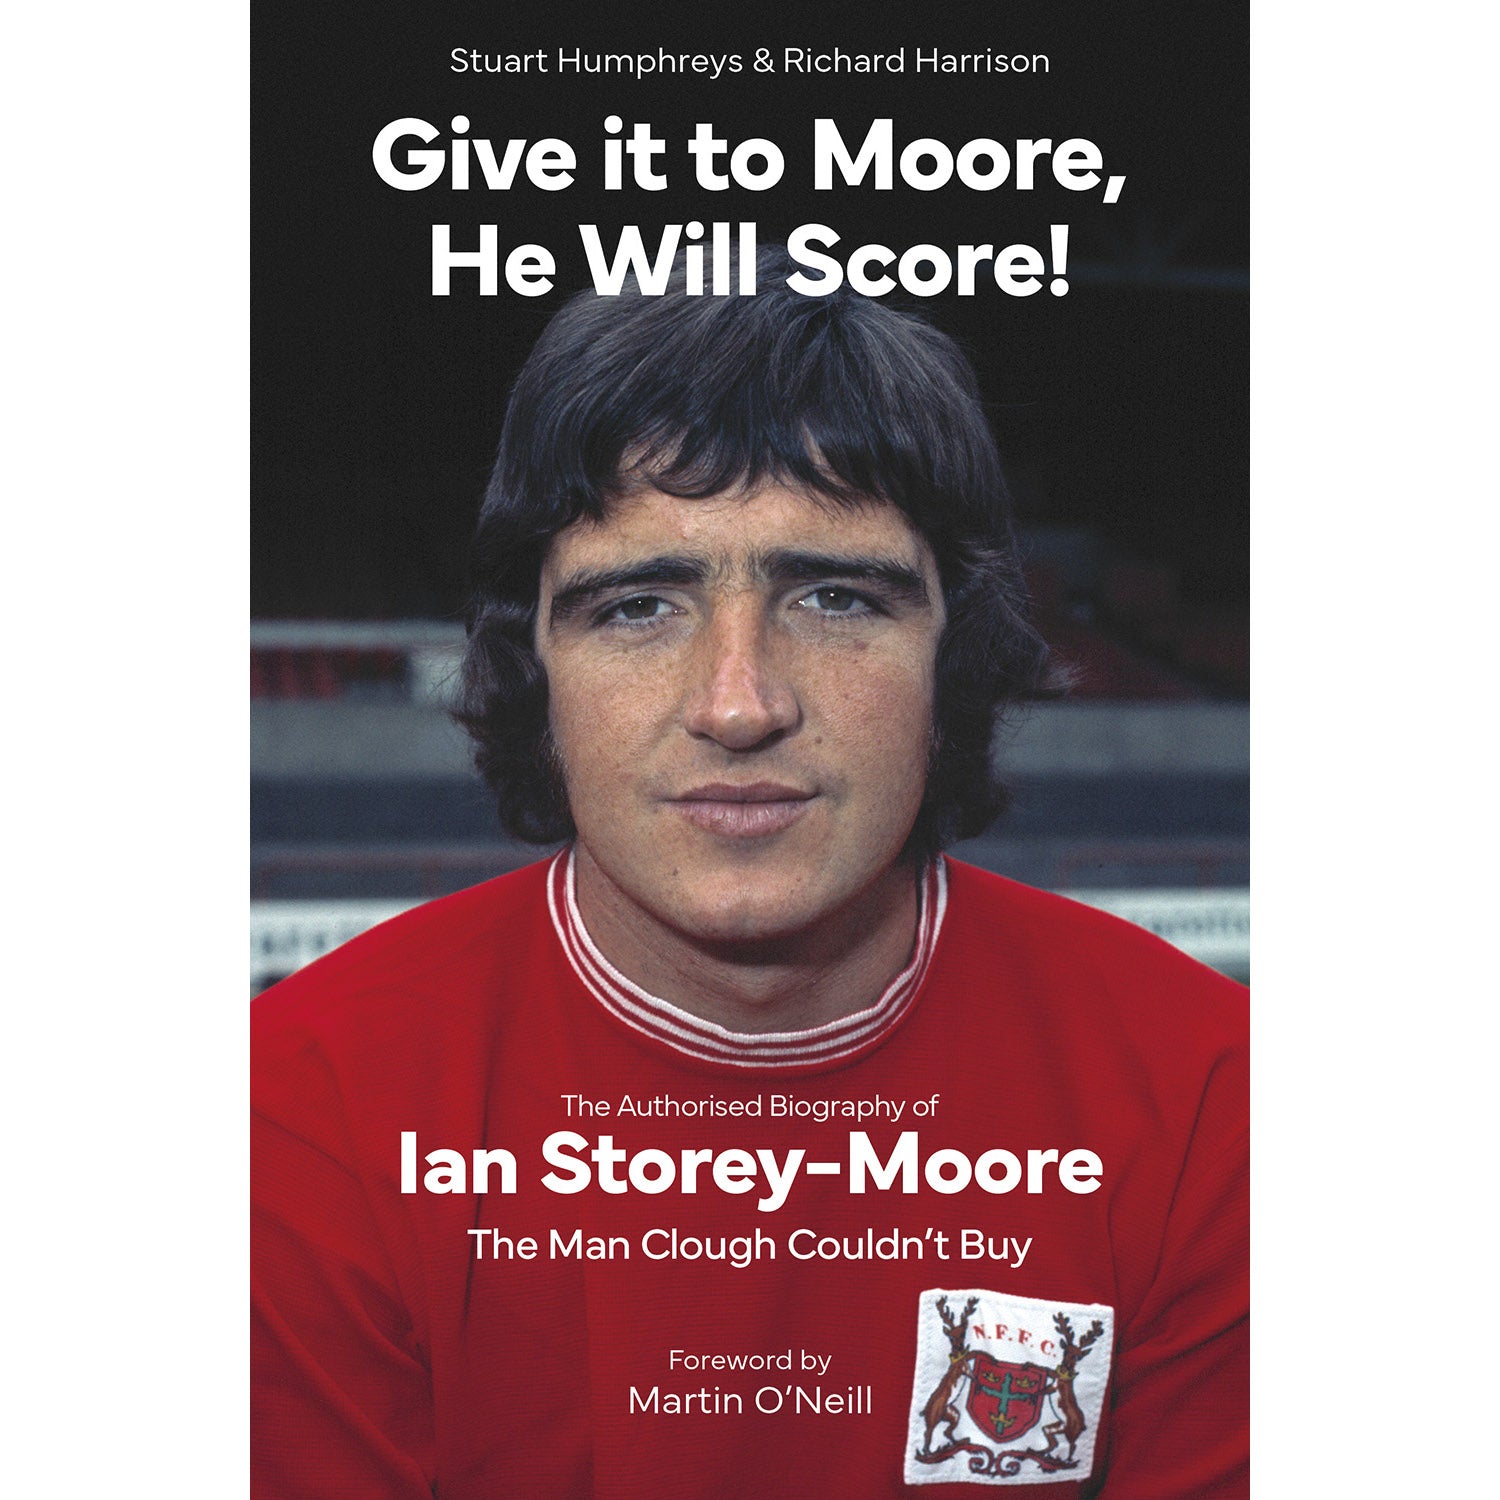 Give it to Moore, He Will Score! – The Authorised Biography of Ian Storey-Moore – SIGNED